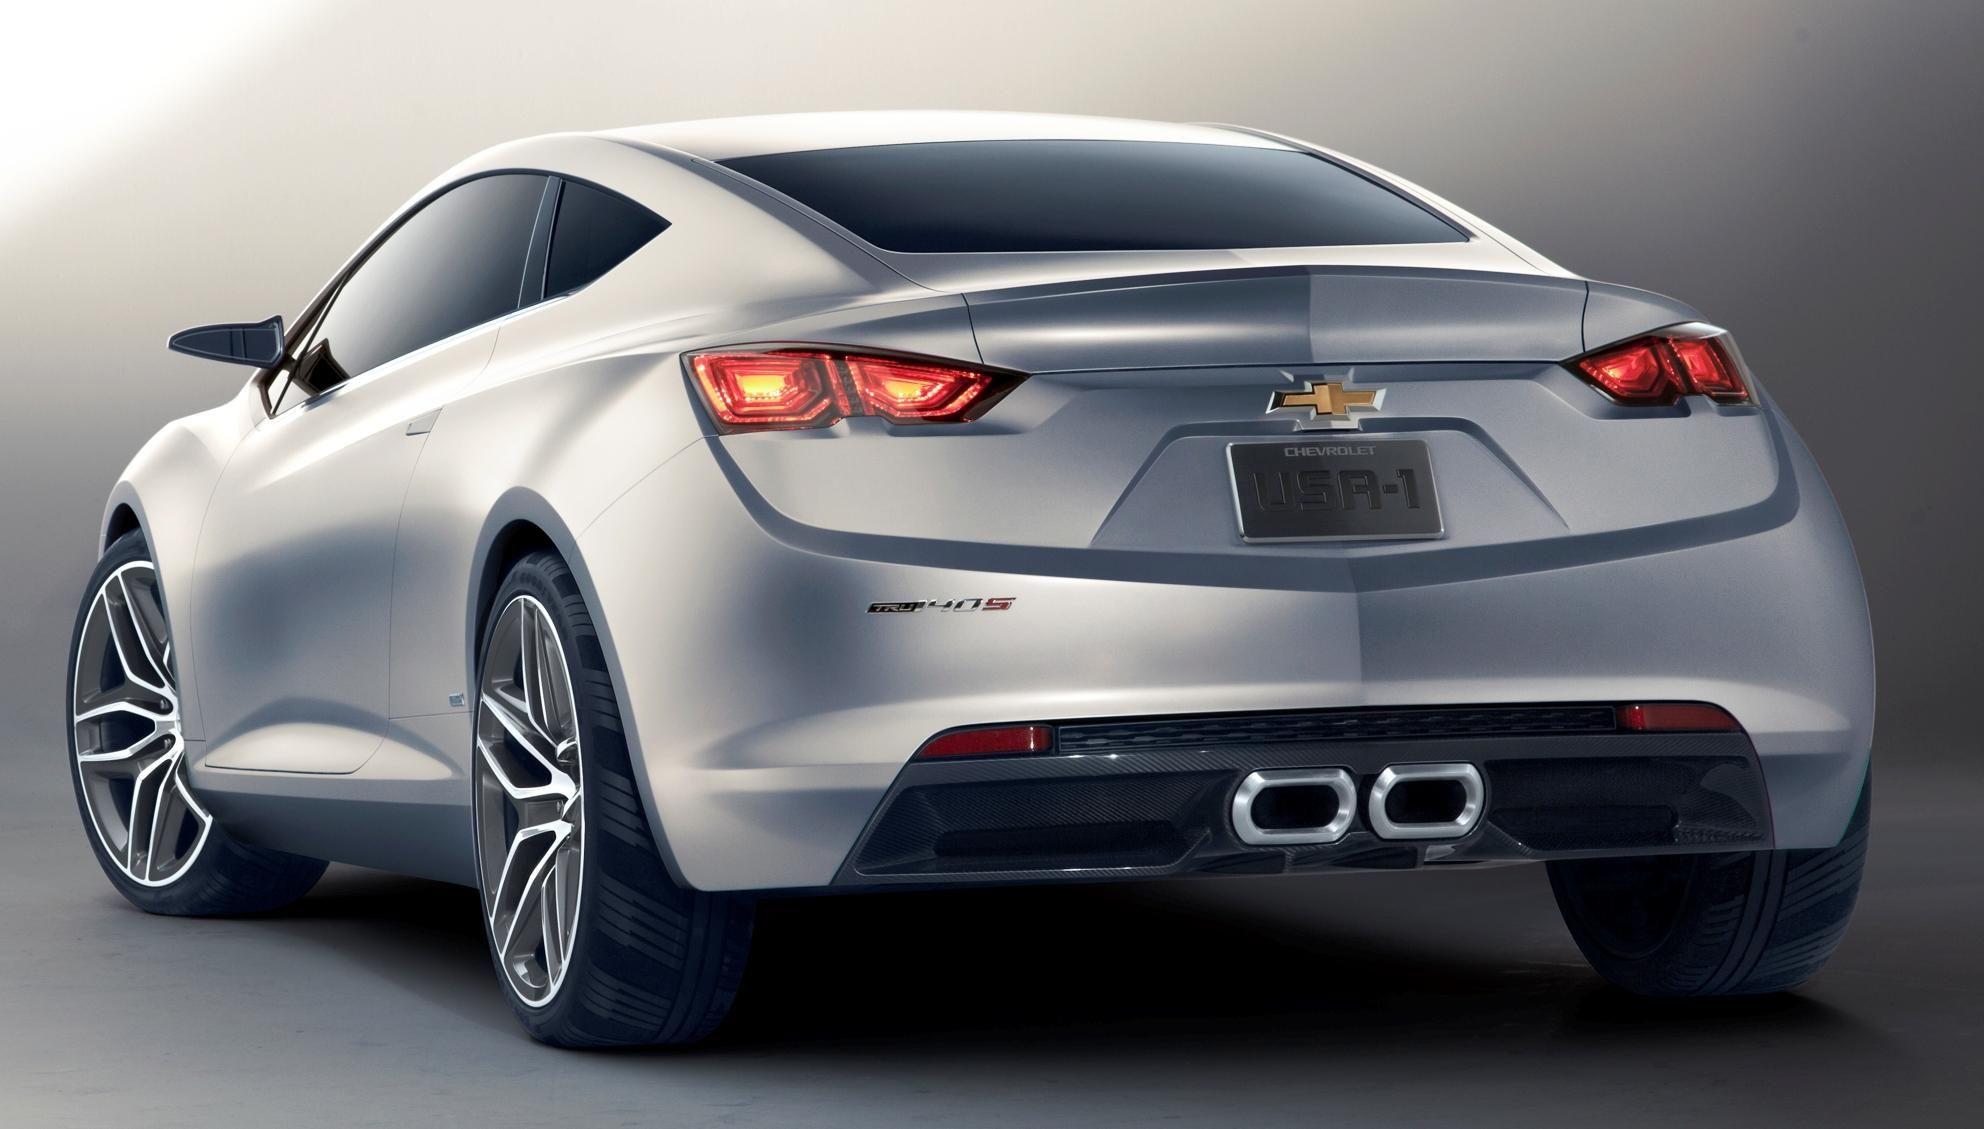 Chevy Concept Cars Wallpaper HD Image